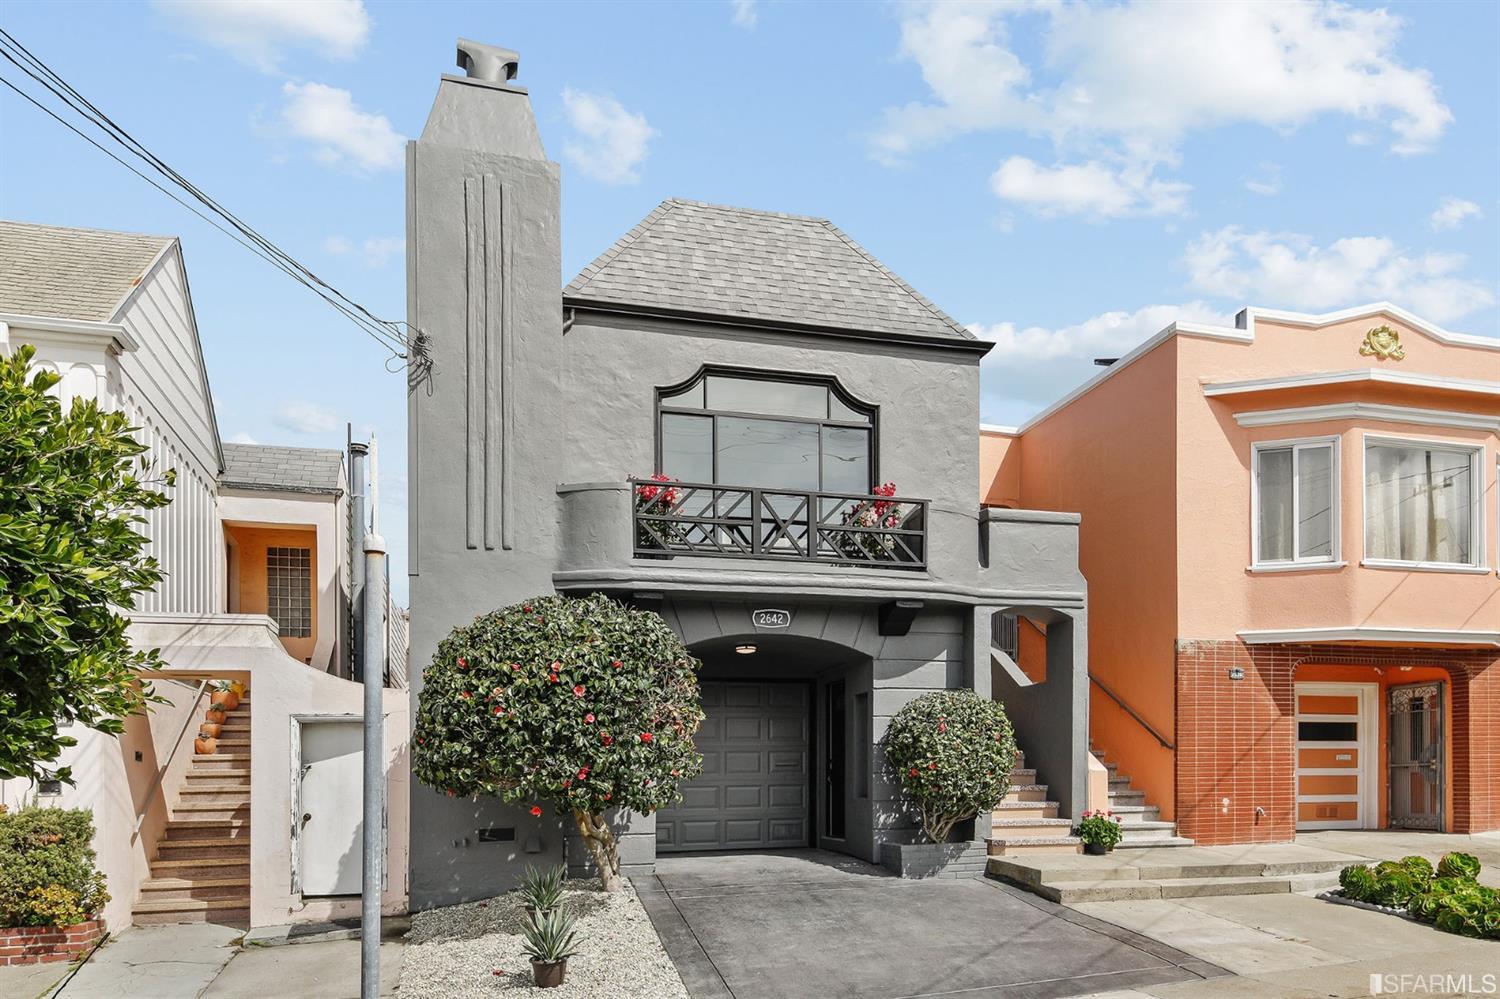 Truly a turnkey property located in the hot Parkside District of SF.&nbsp; Easy access to the Taraval corridor, great restaurants, the 280, Ocean Beach, Lake Merced, West Portal Village and so much more.&nbsp;&nbsp;